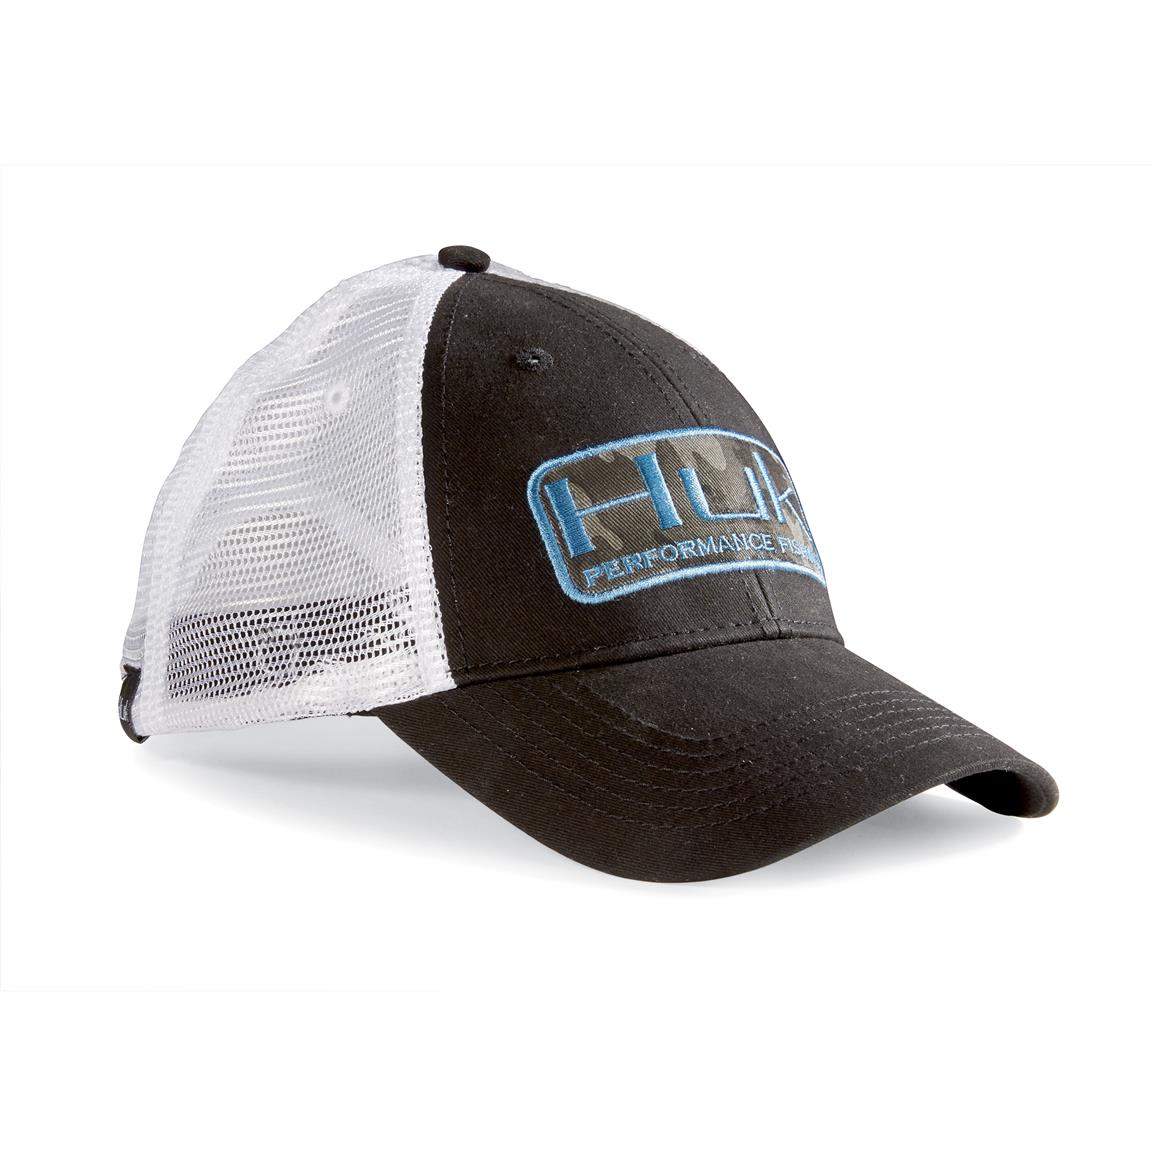 Huk Patch Trucker Cap - 625823, Hats & Caps at Sportsman's Guide